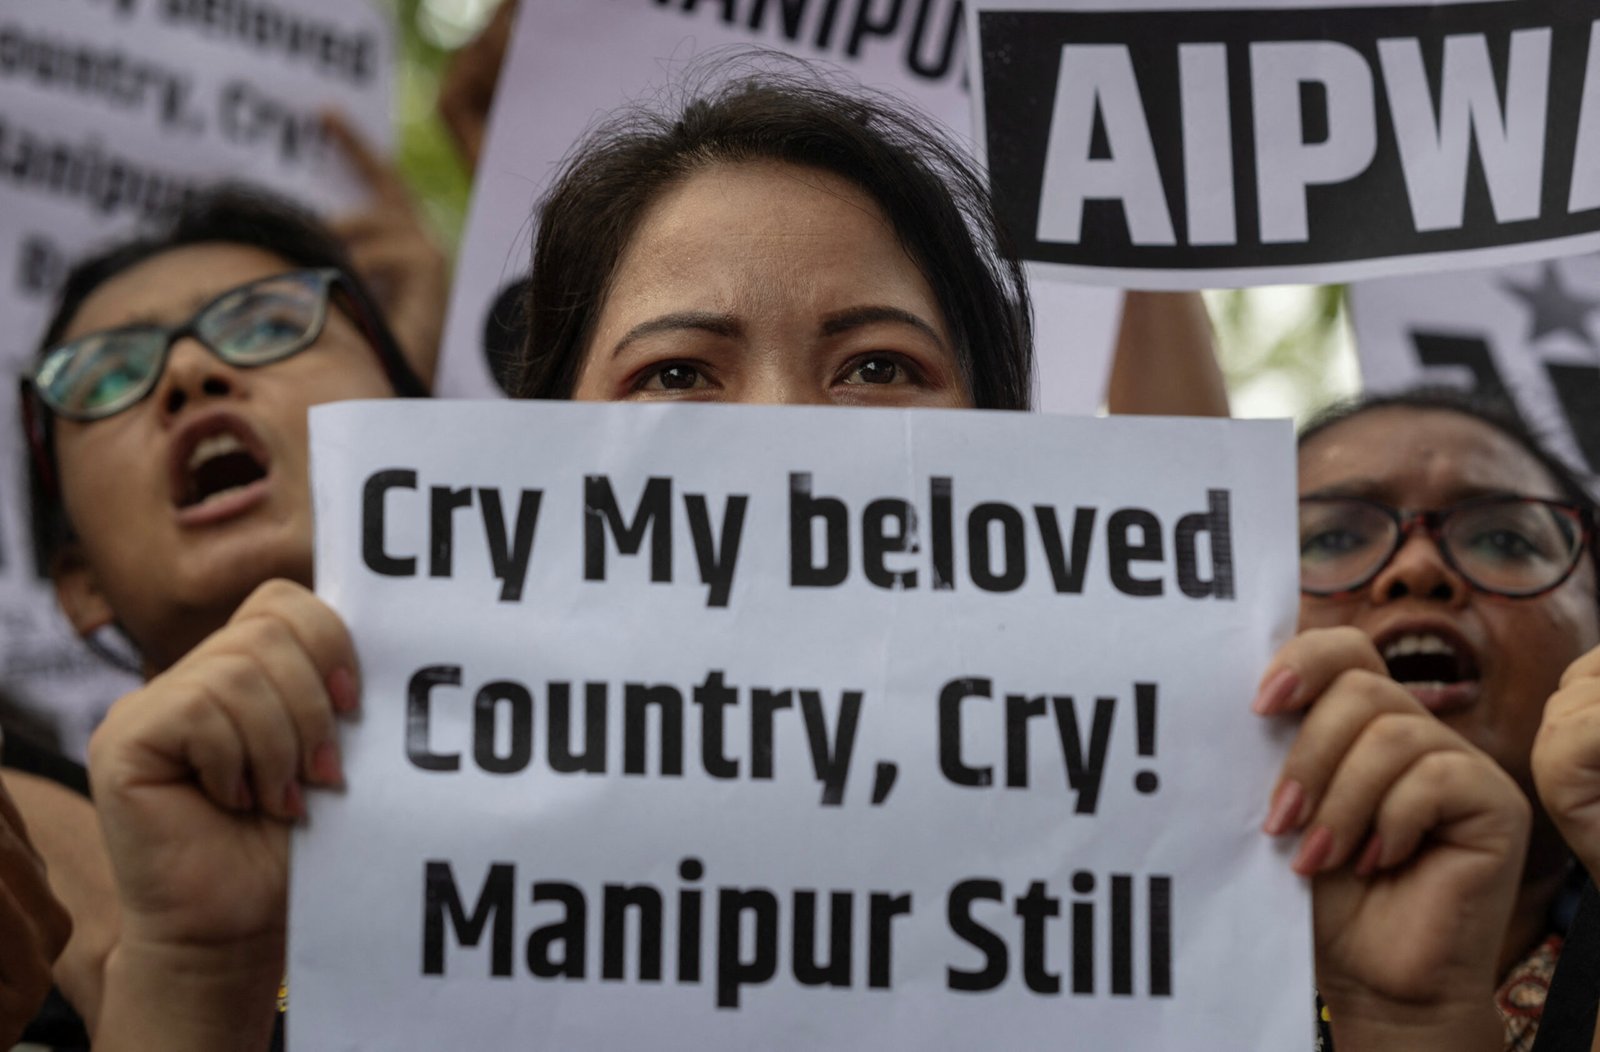 manipur:-ethnic-violence-in-the-indian-state-explained